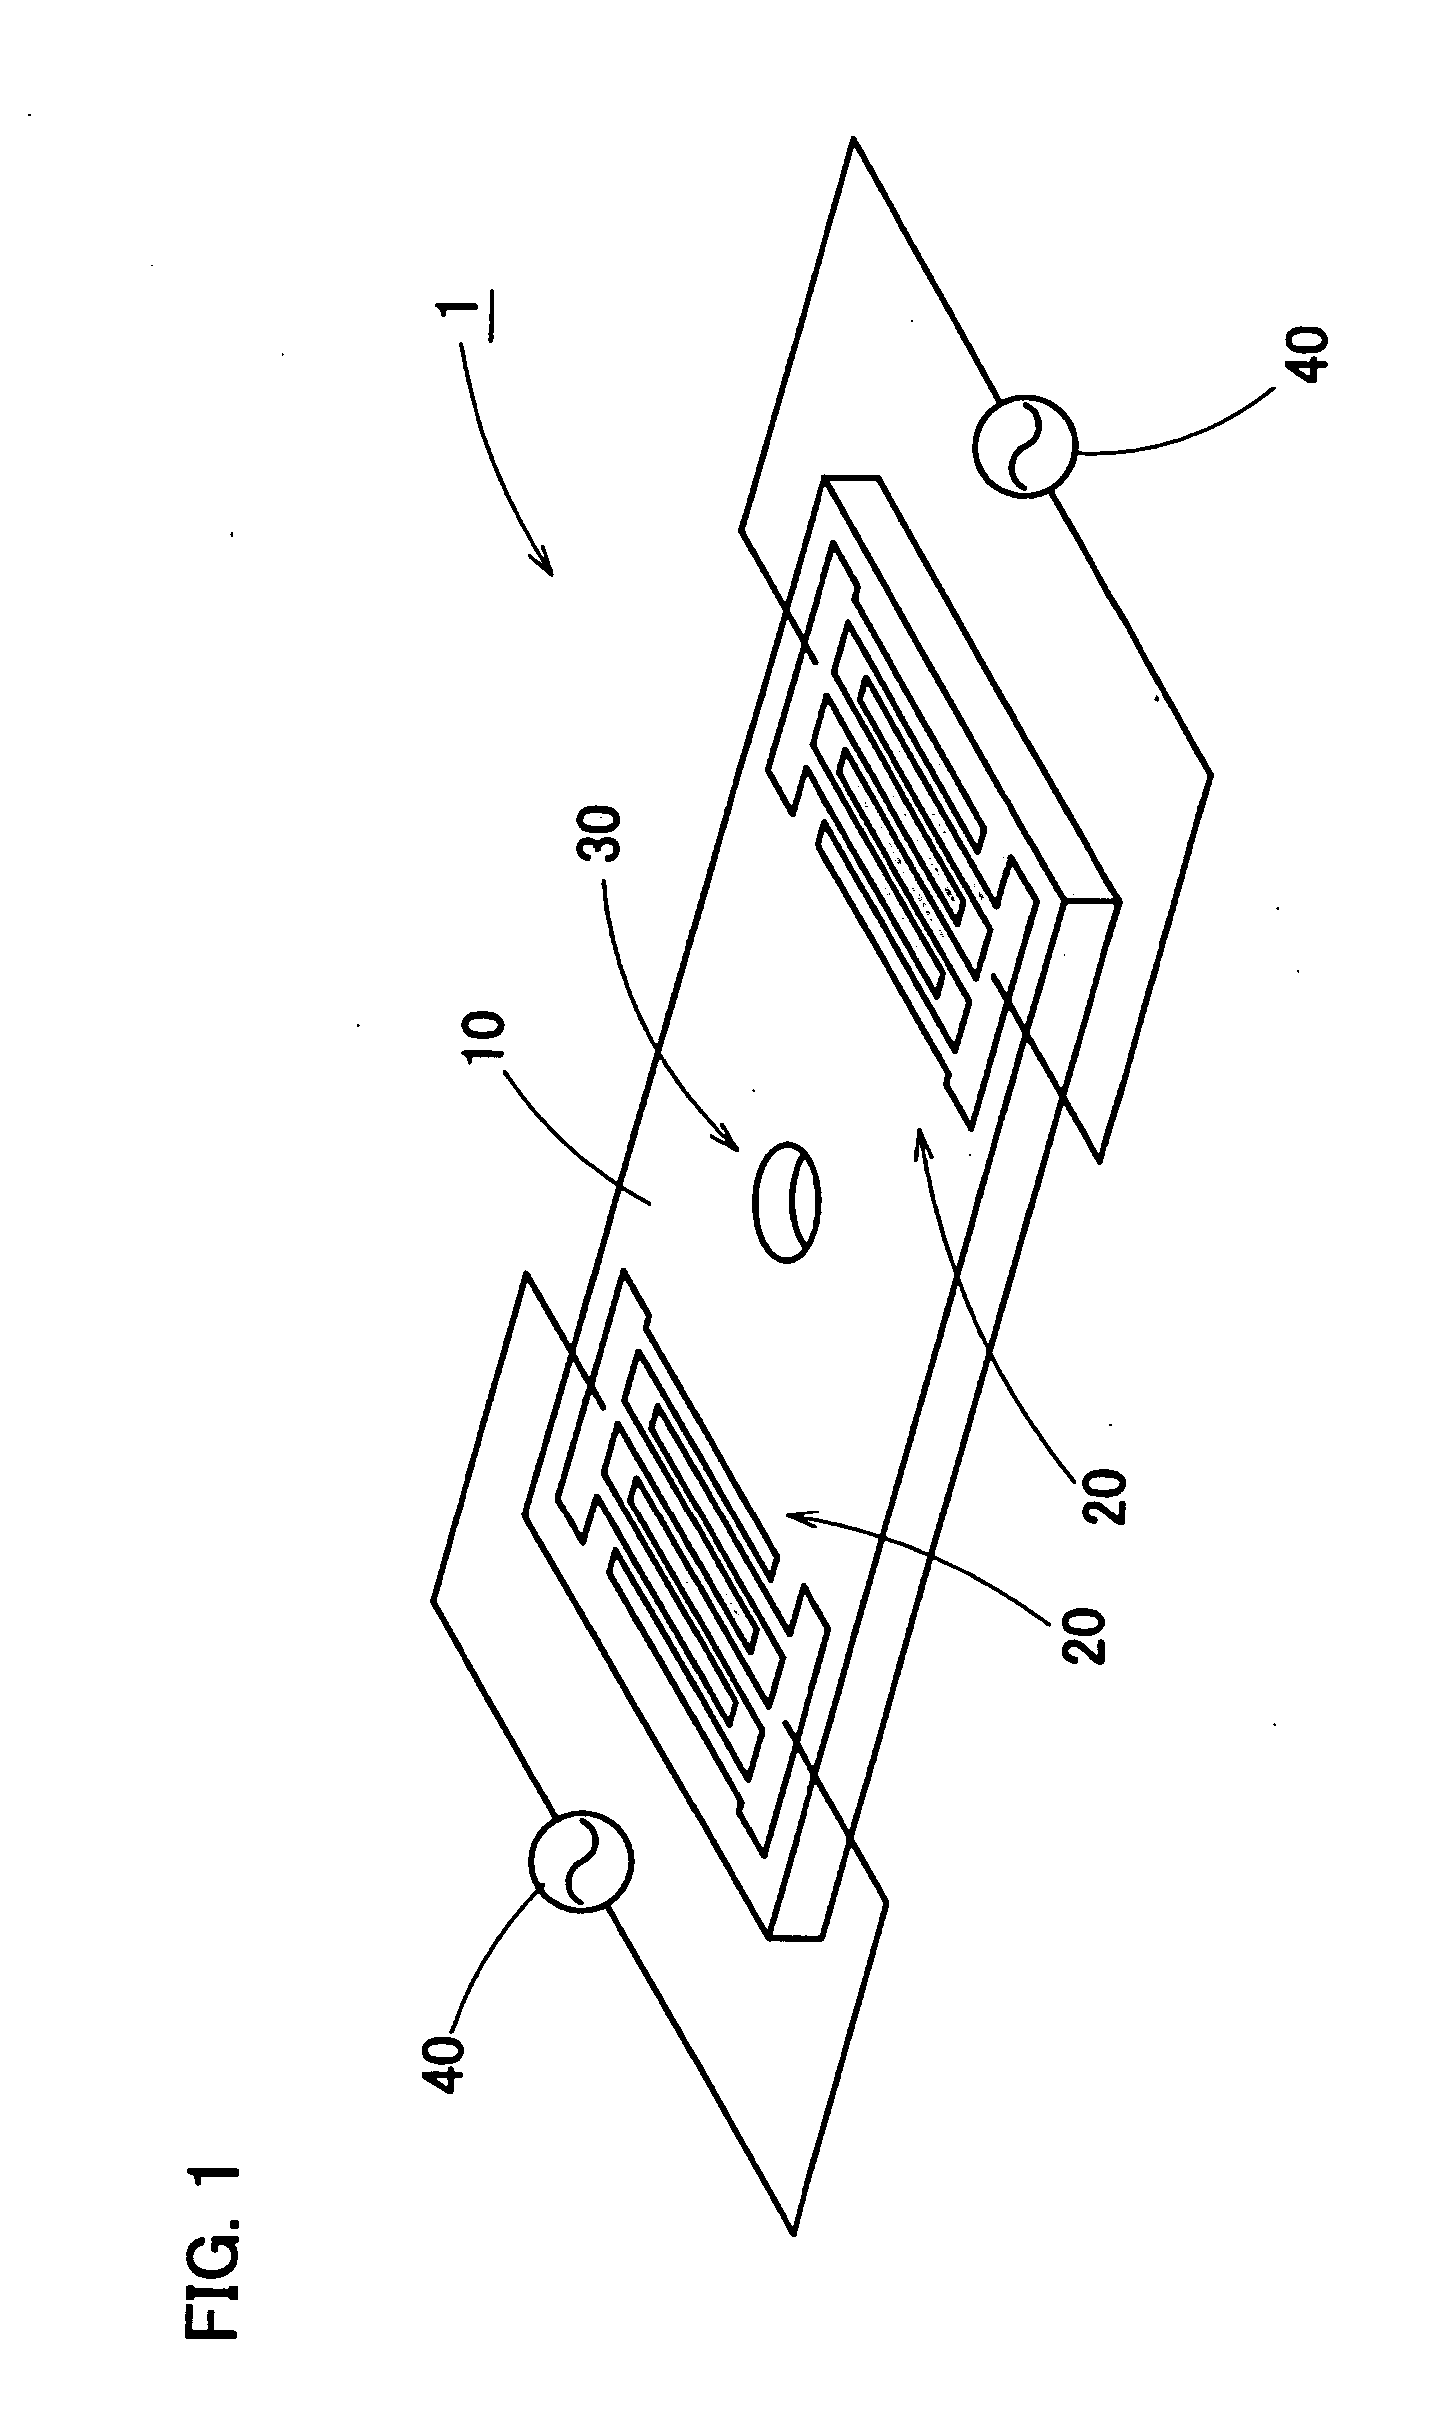 Heating apparatus using surface acoustic wave